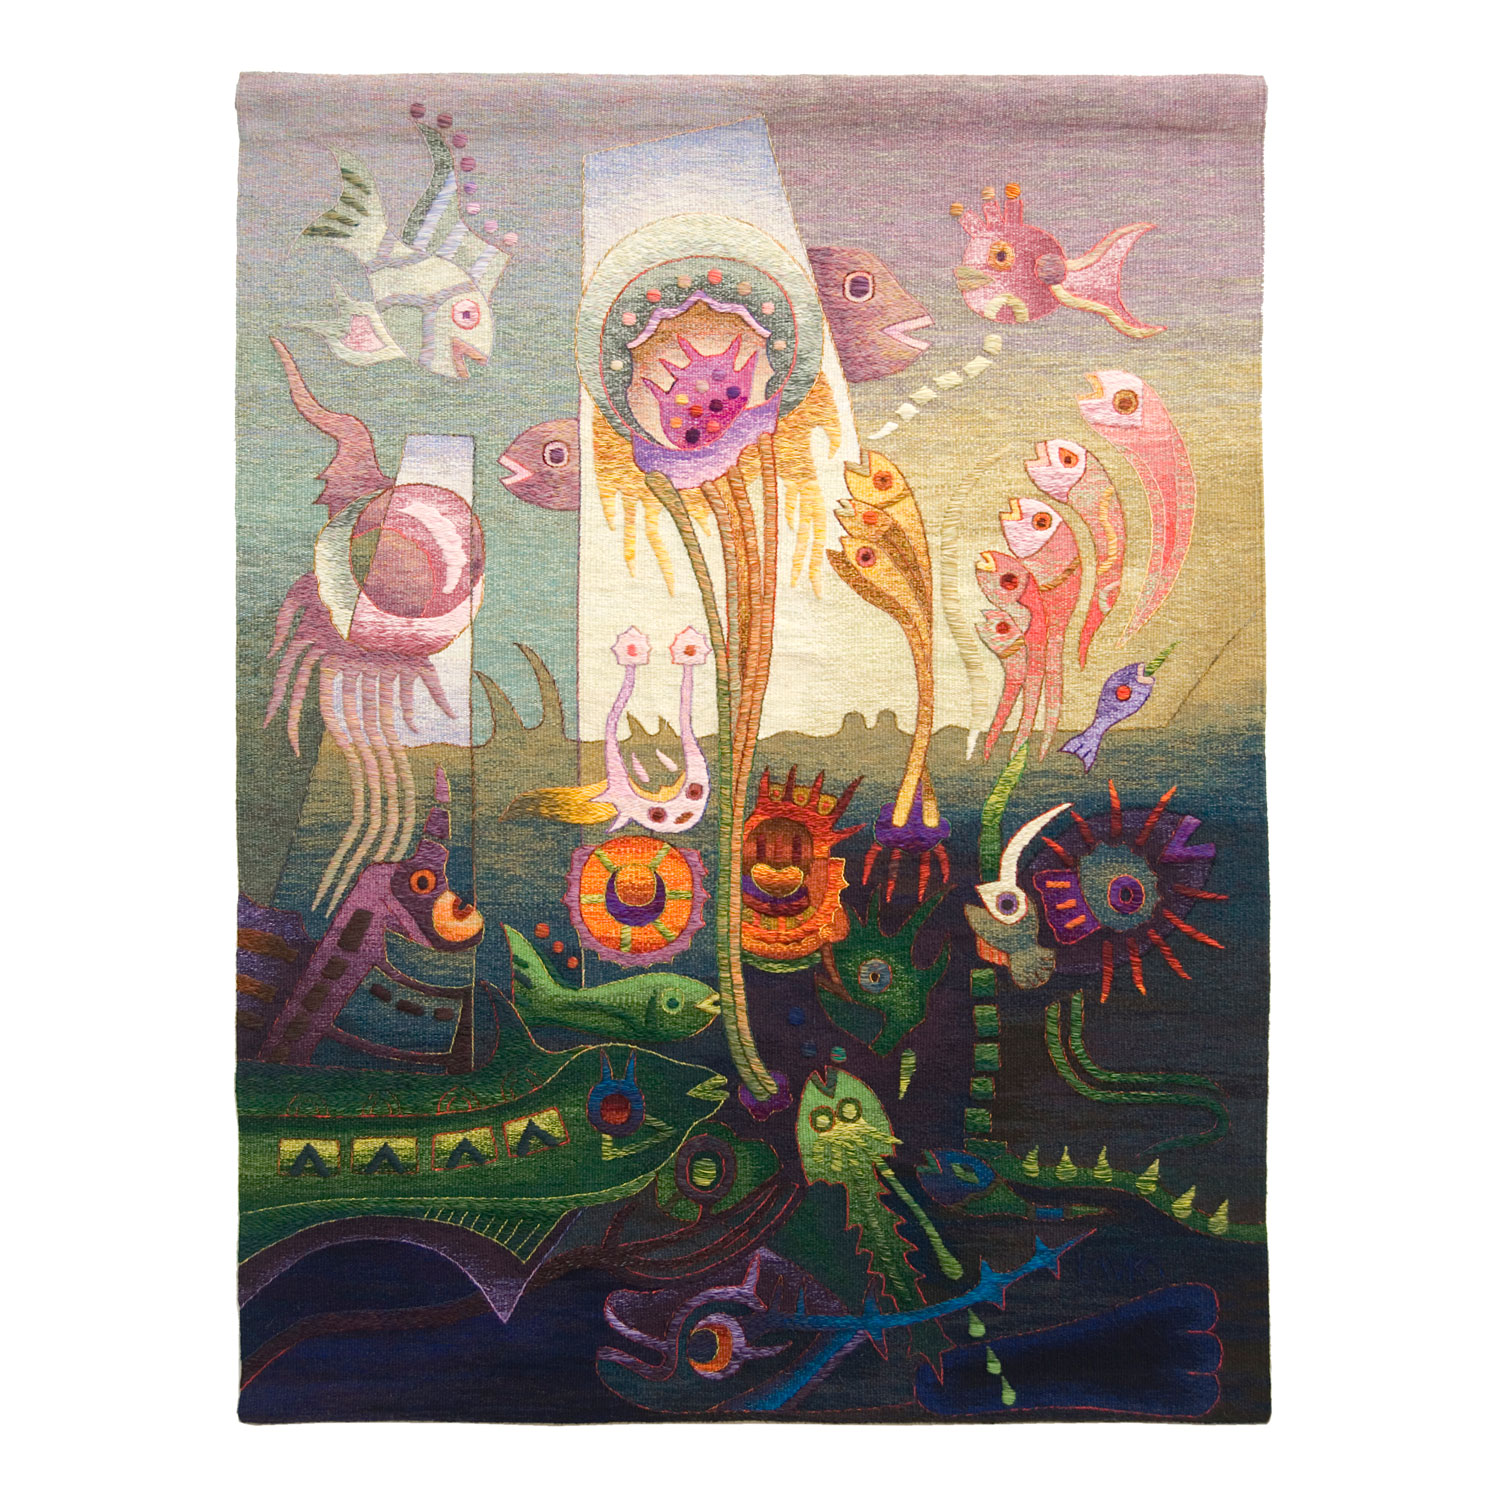 Worship of the JellyfishSize: 62 x 47"